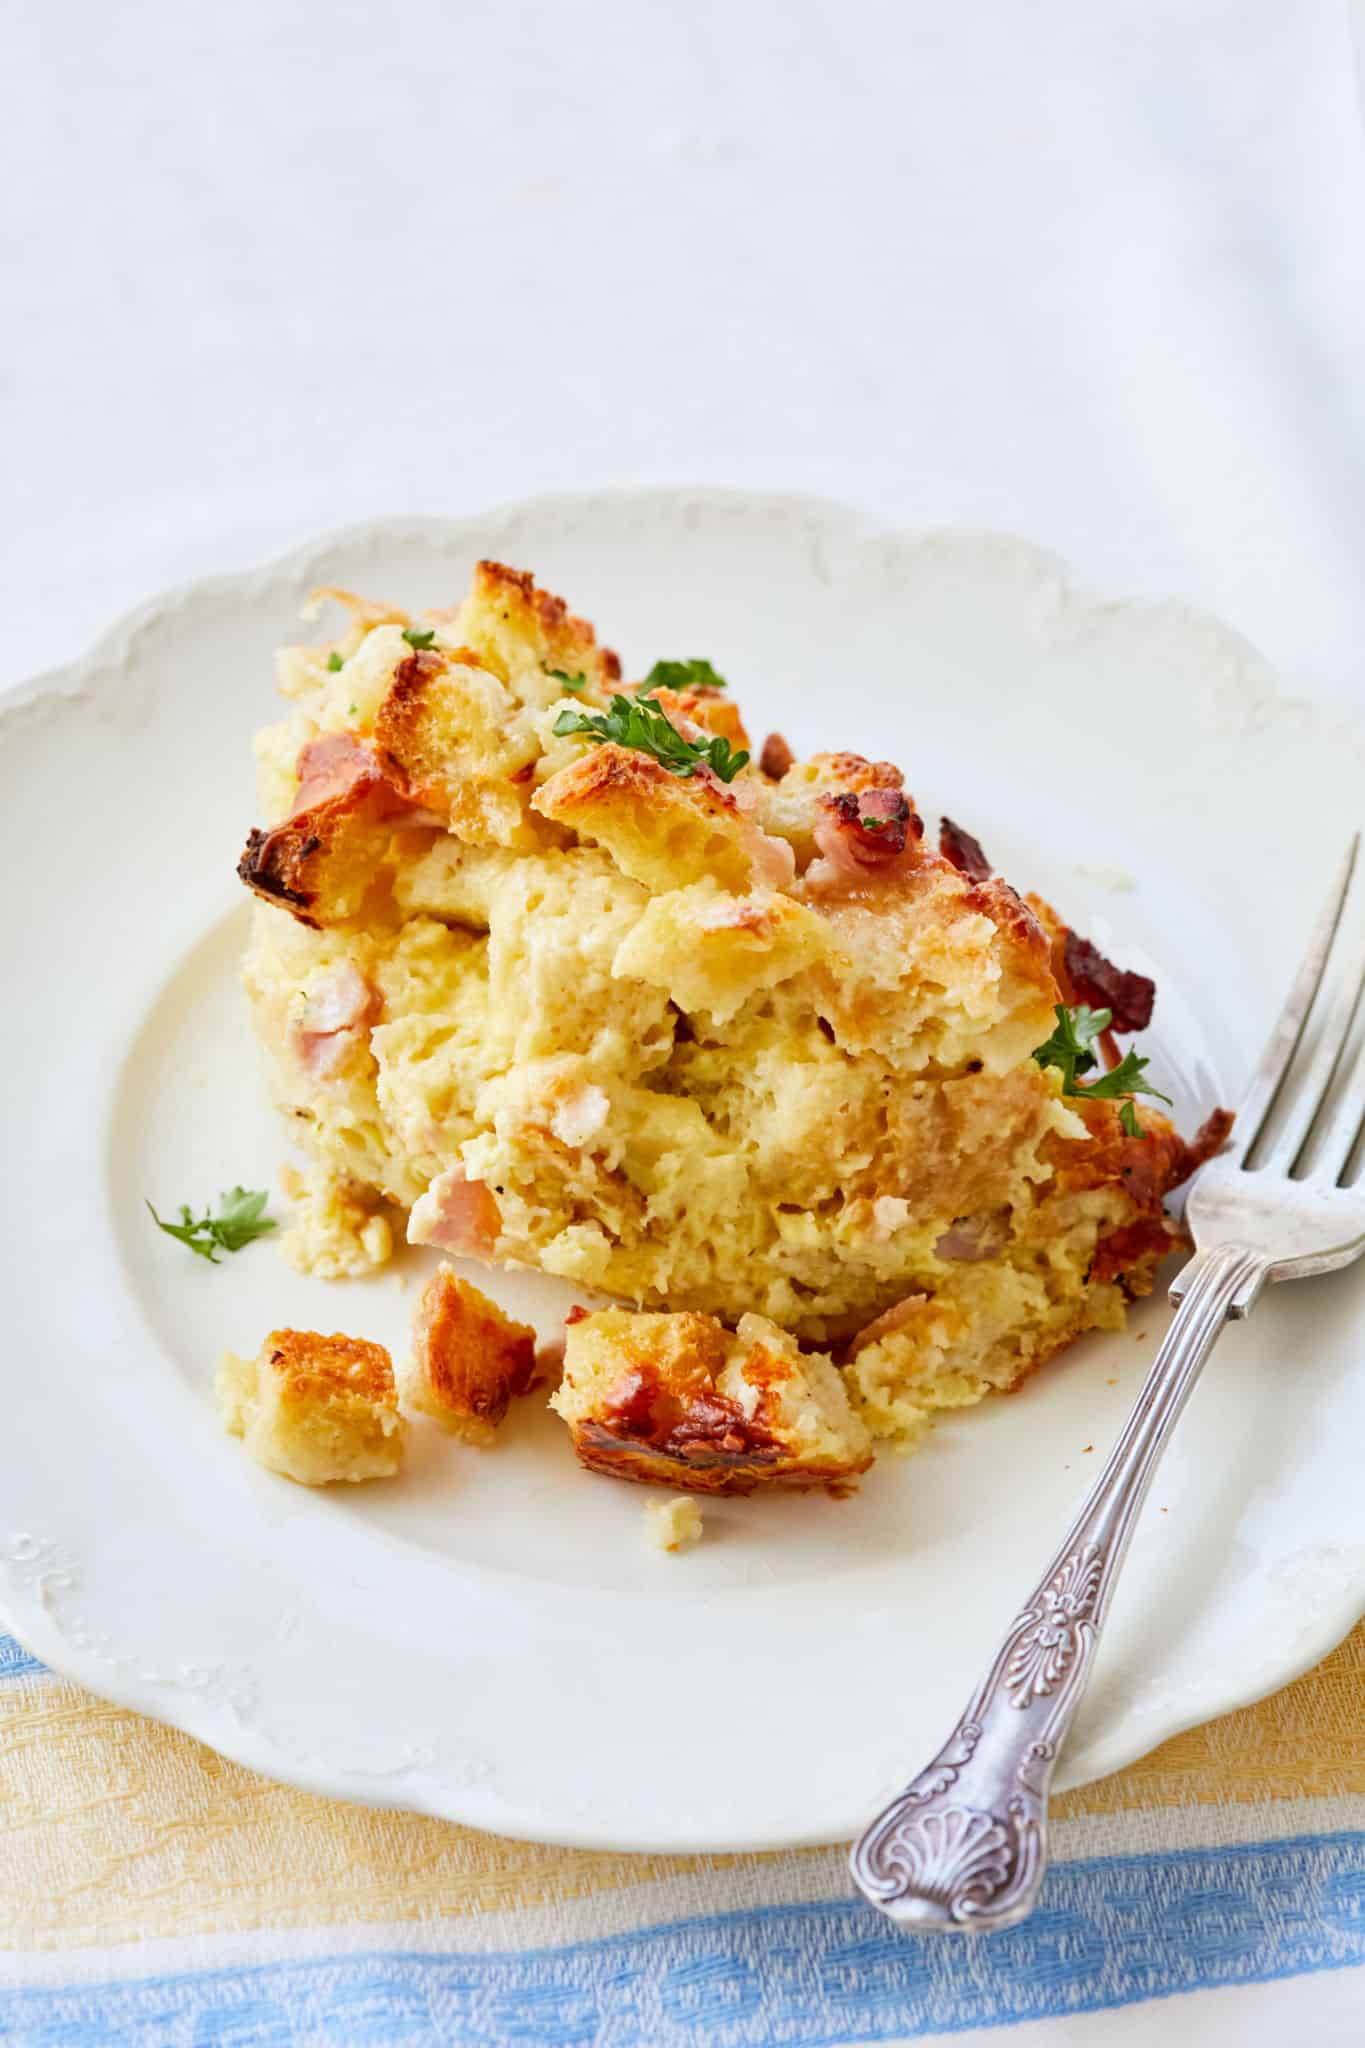 A heaping serving of Croque Monsieur Savory Bread Pudding